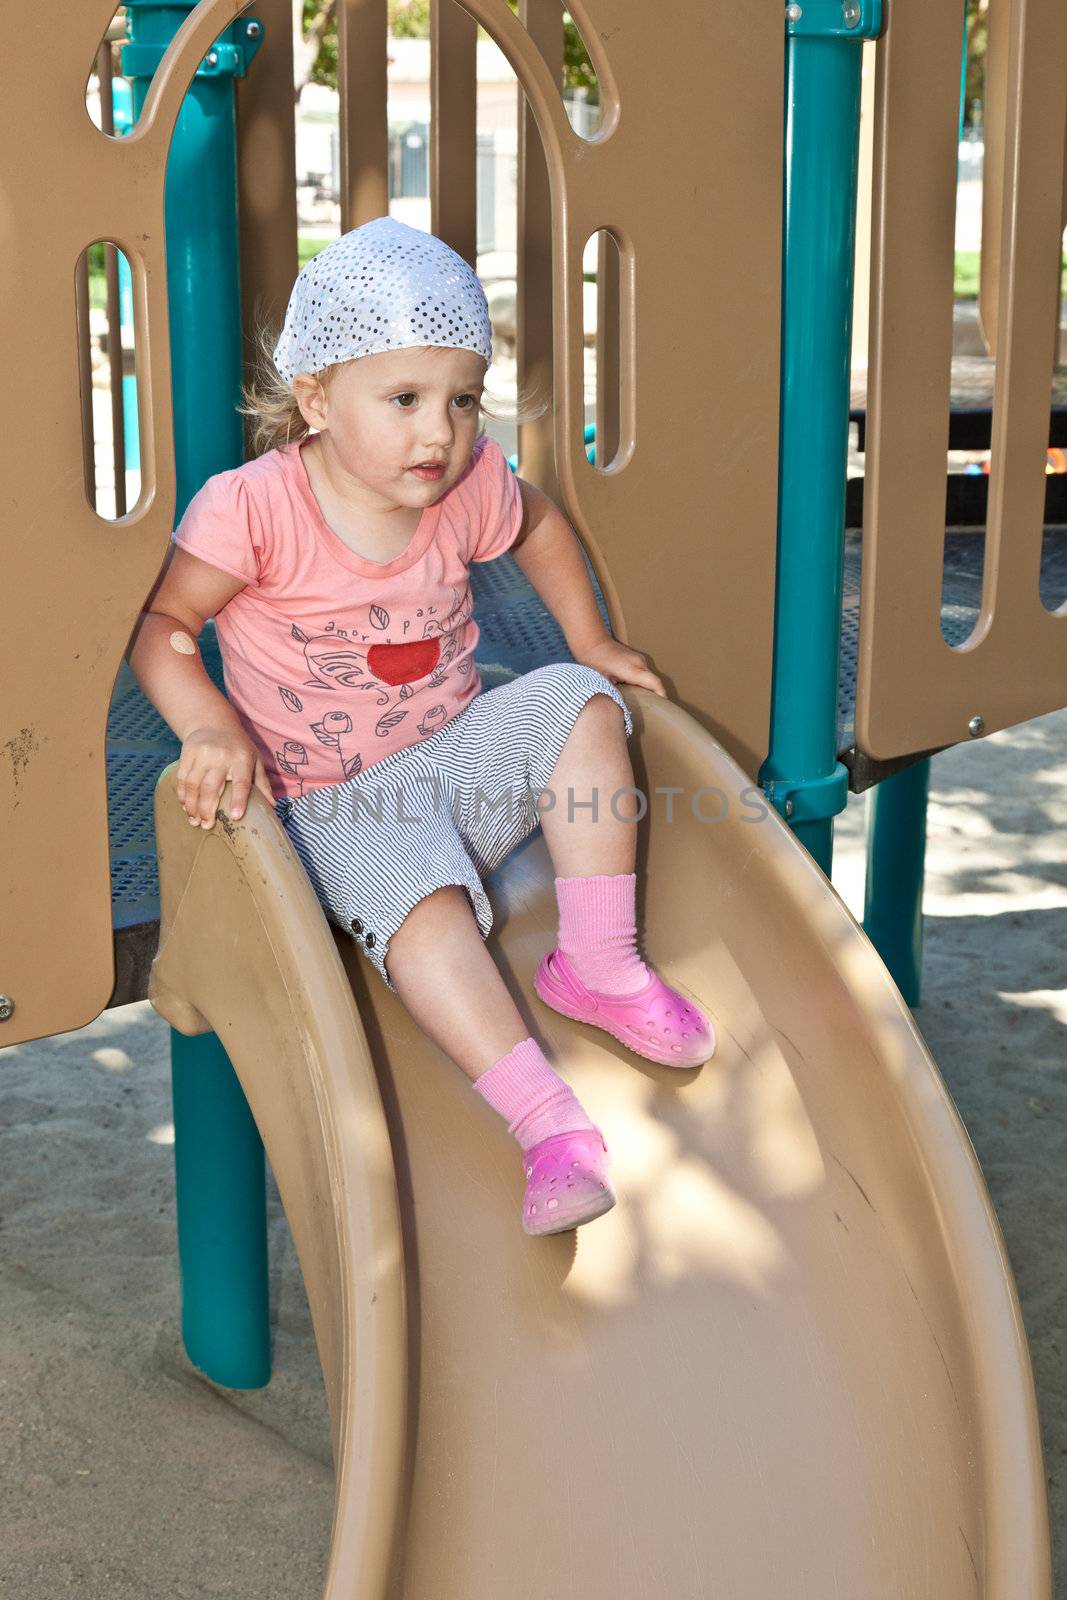 Cute little European toddler girl having fun at the playground in the park.